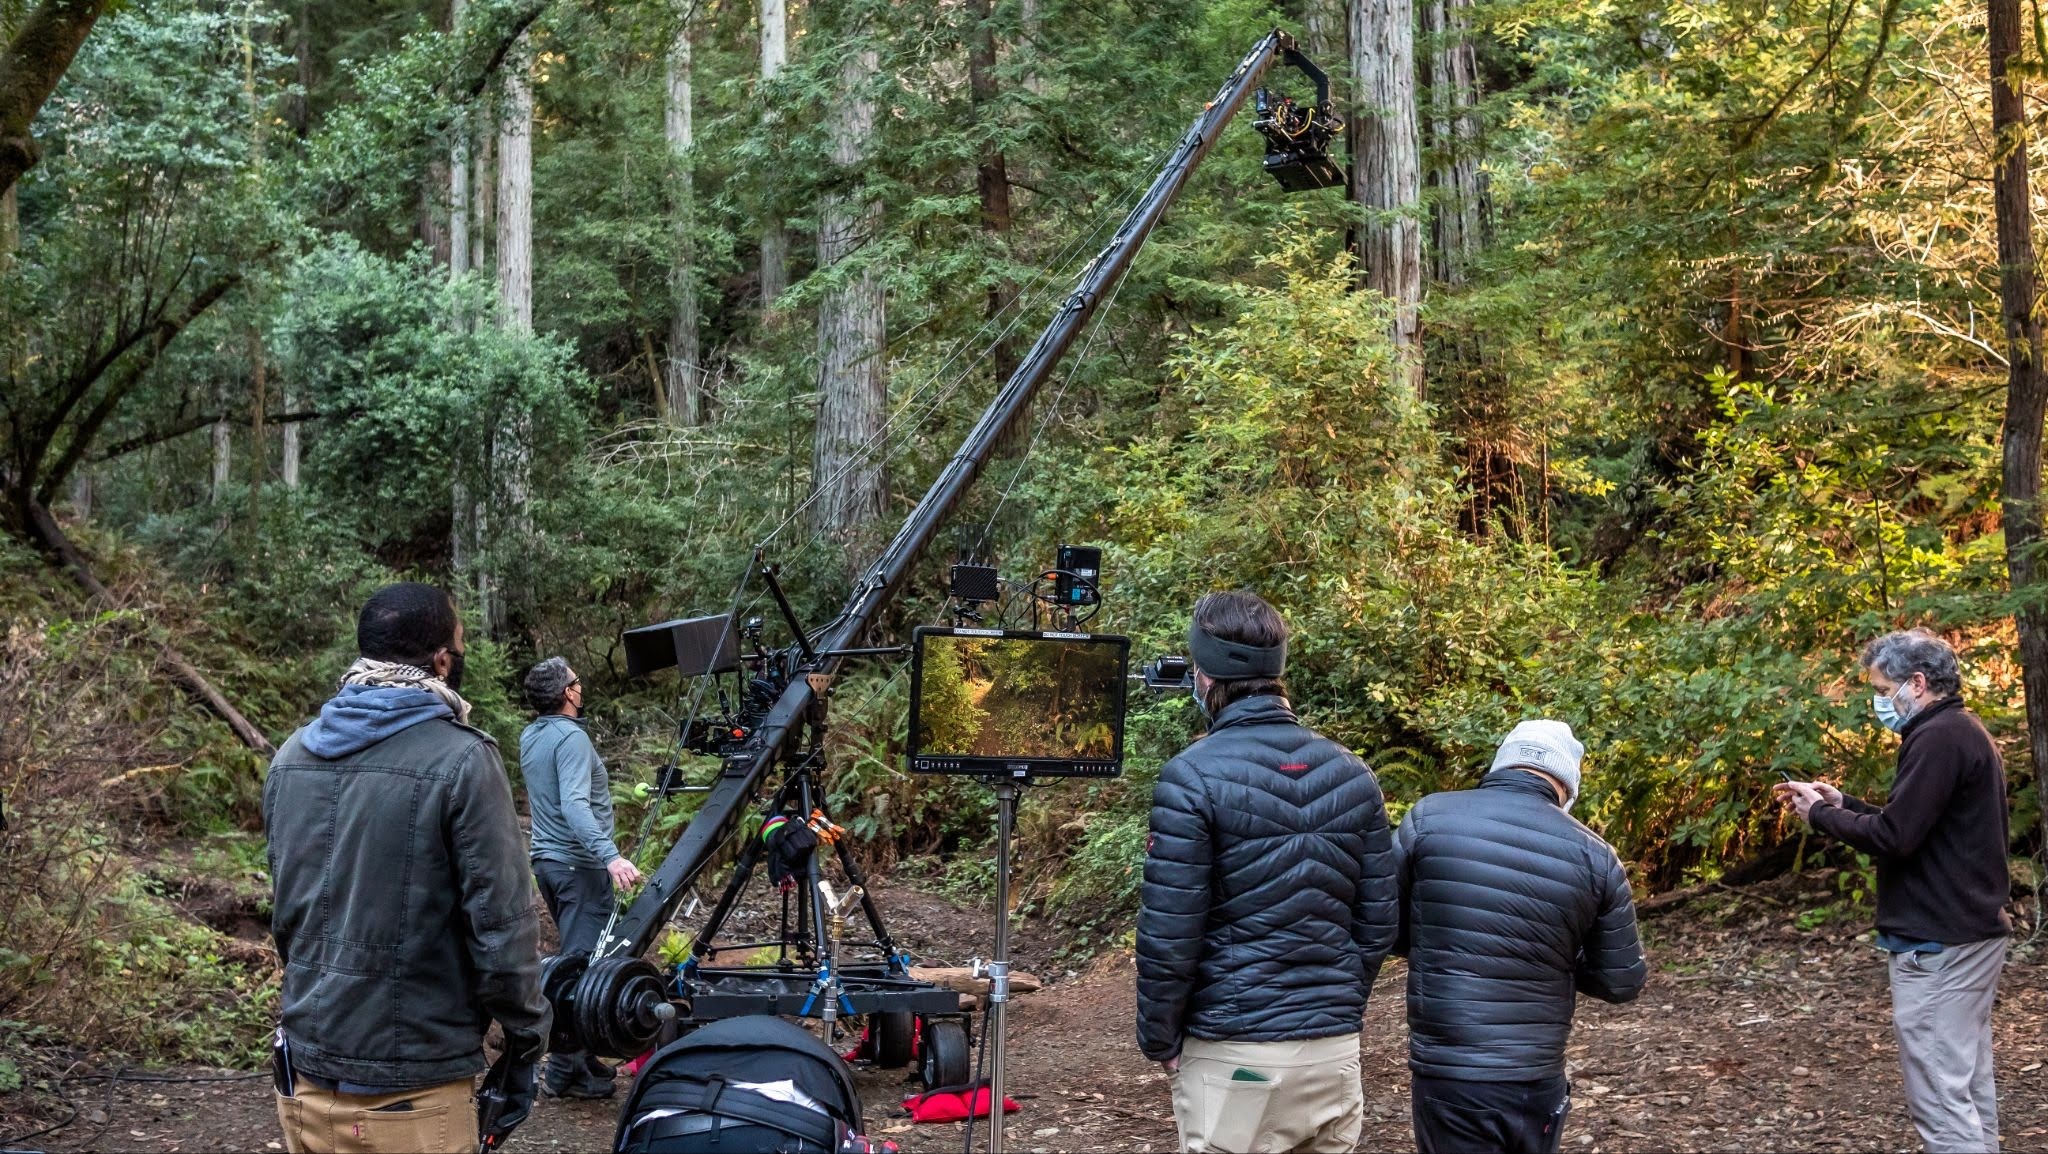 Slow Clap’s Selects: Our Top 5 Filming Locations in the San Francisco Bay Area for Corporate and Commercial Videos